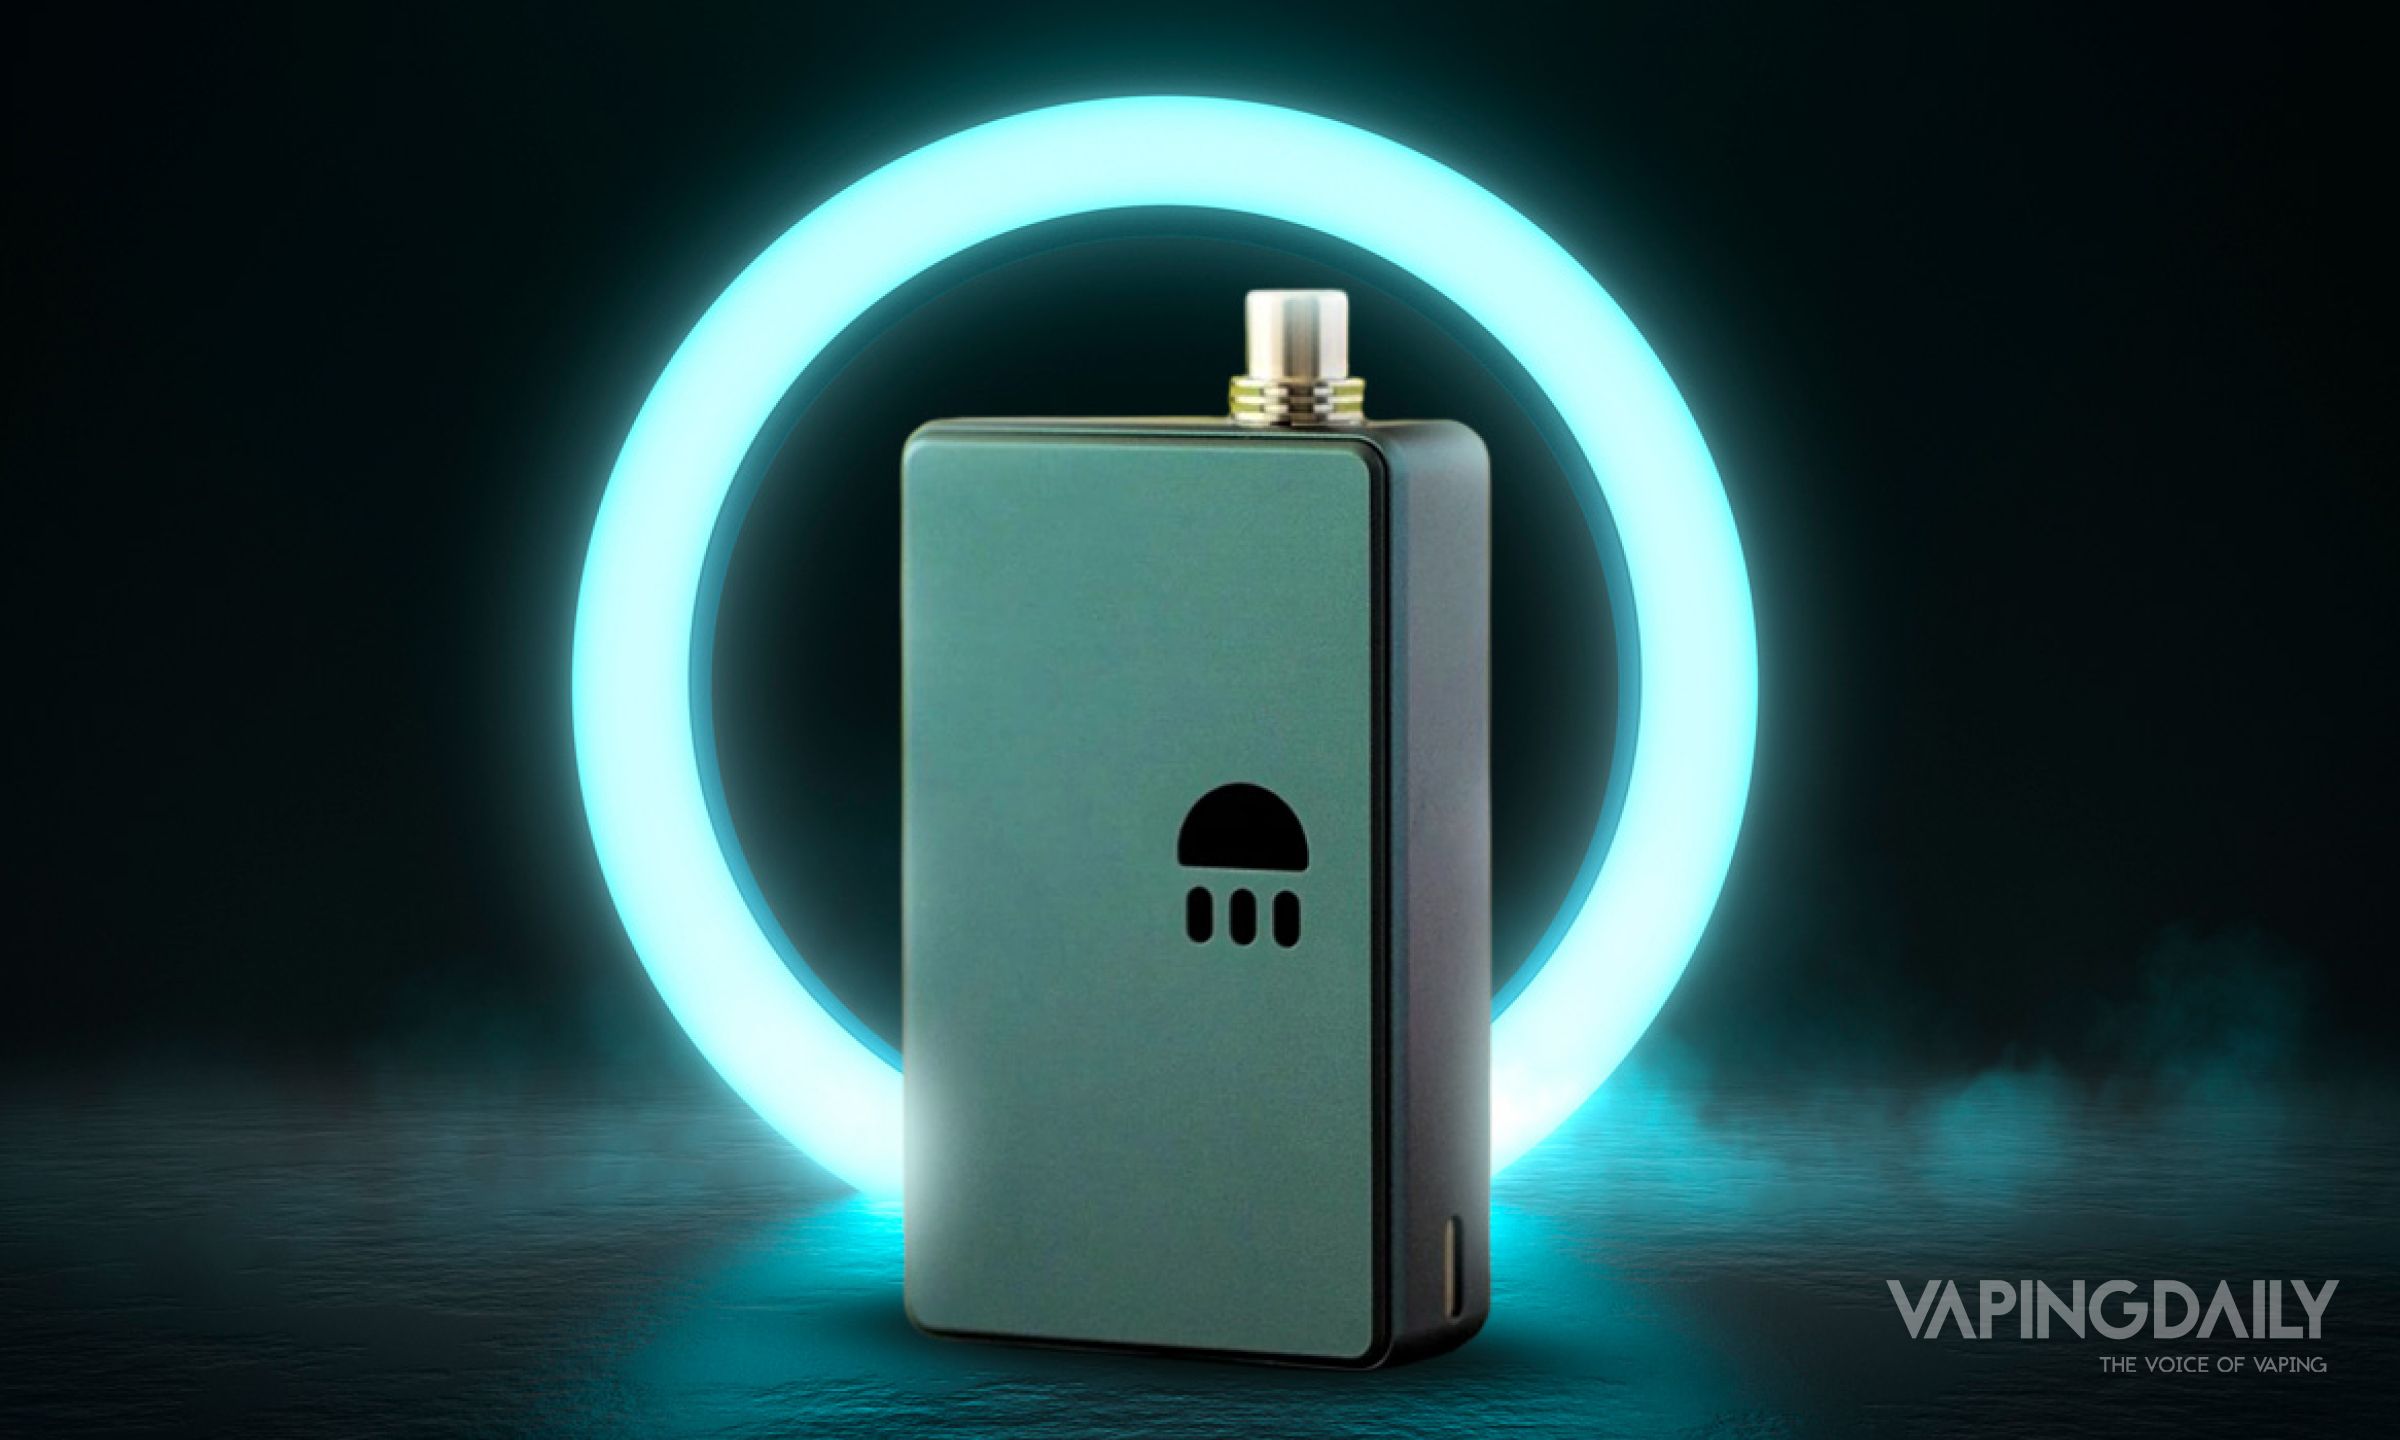 Cthulhu AIO Review: The Compact RBA Box for MTL Vaping